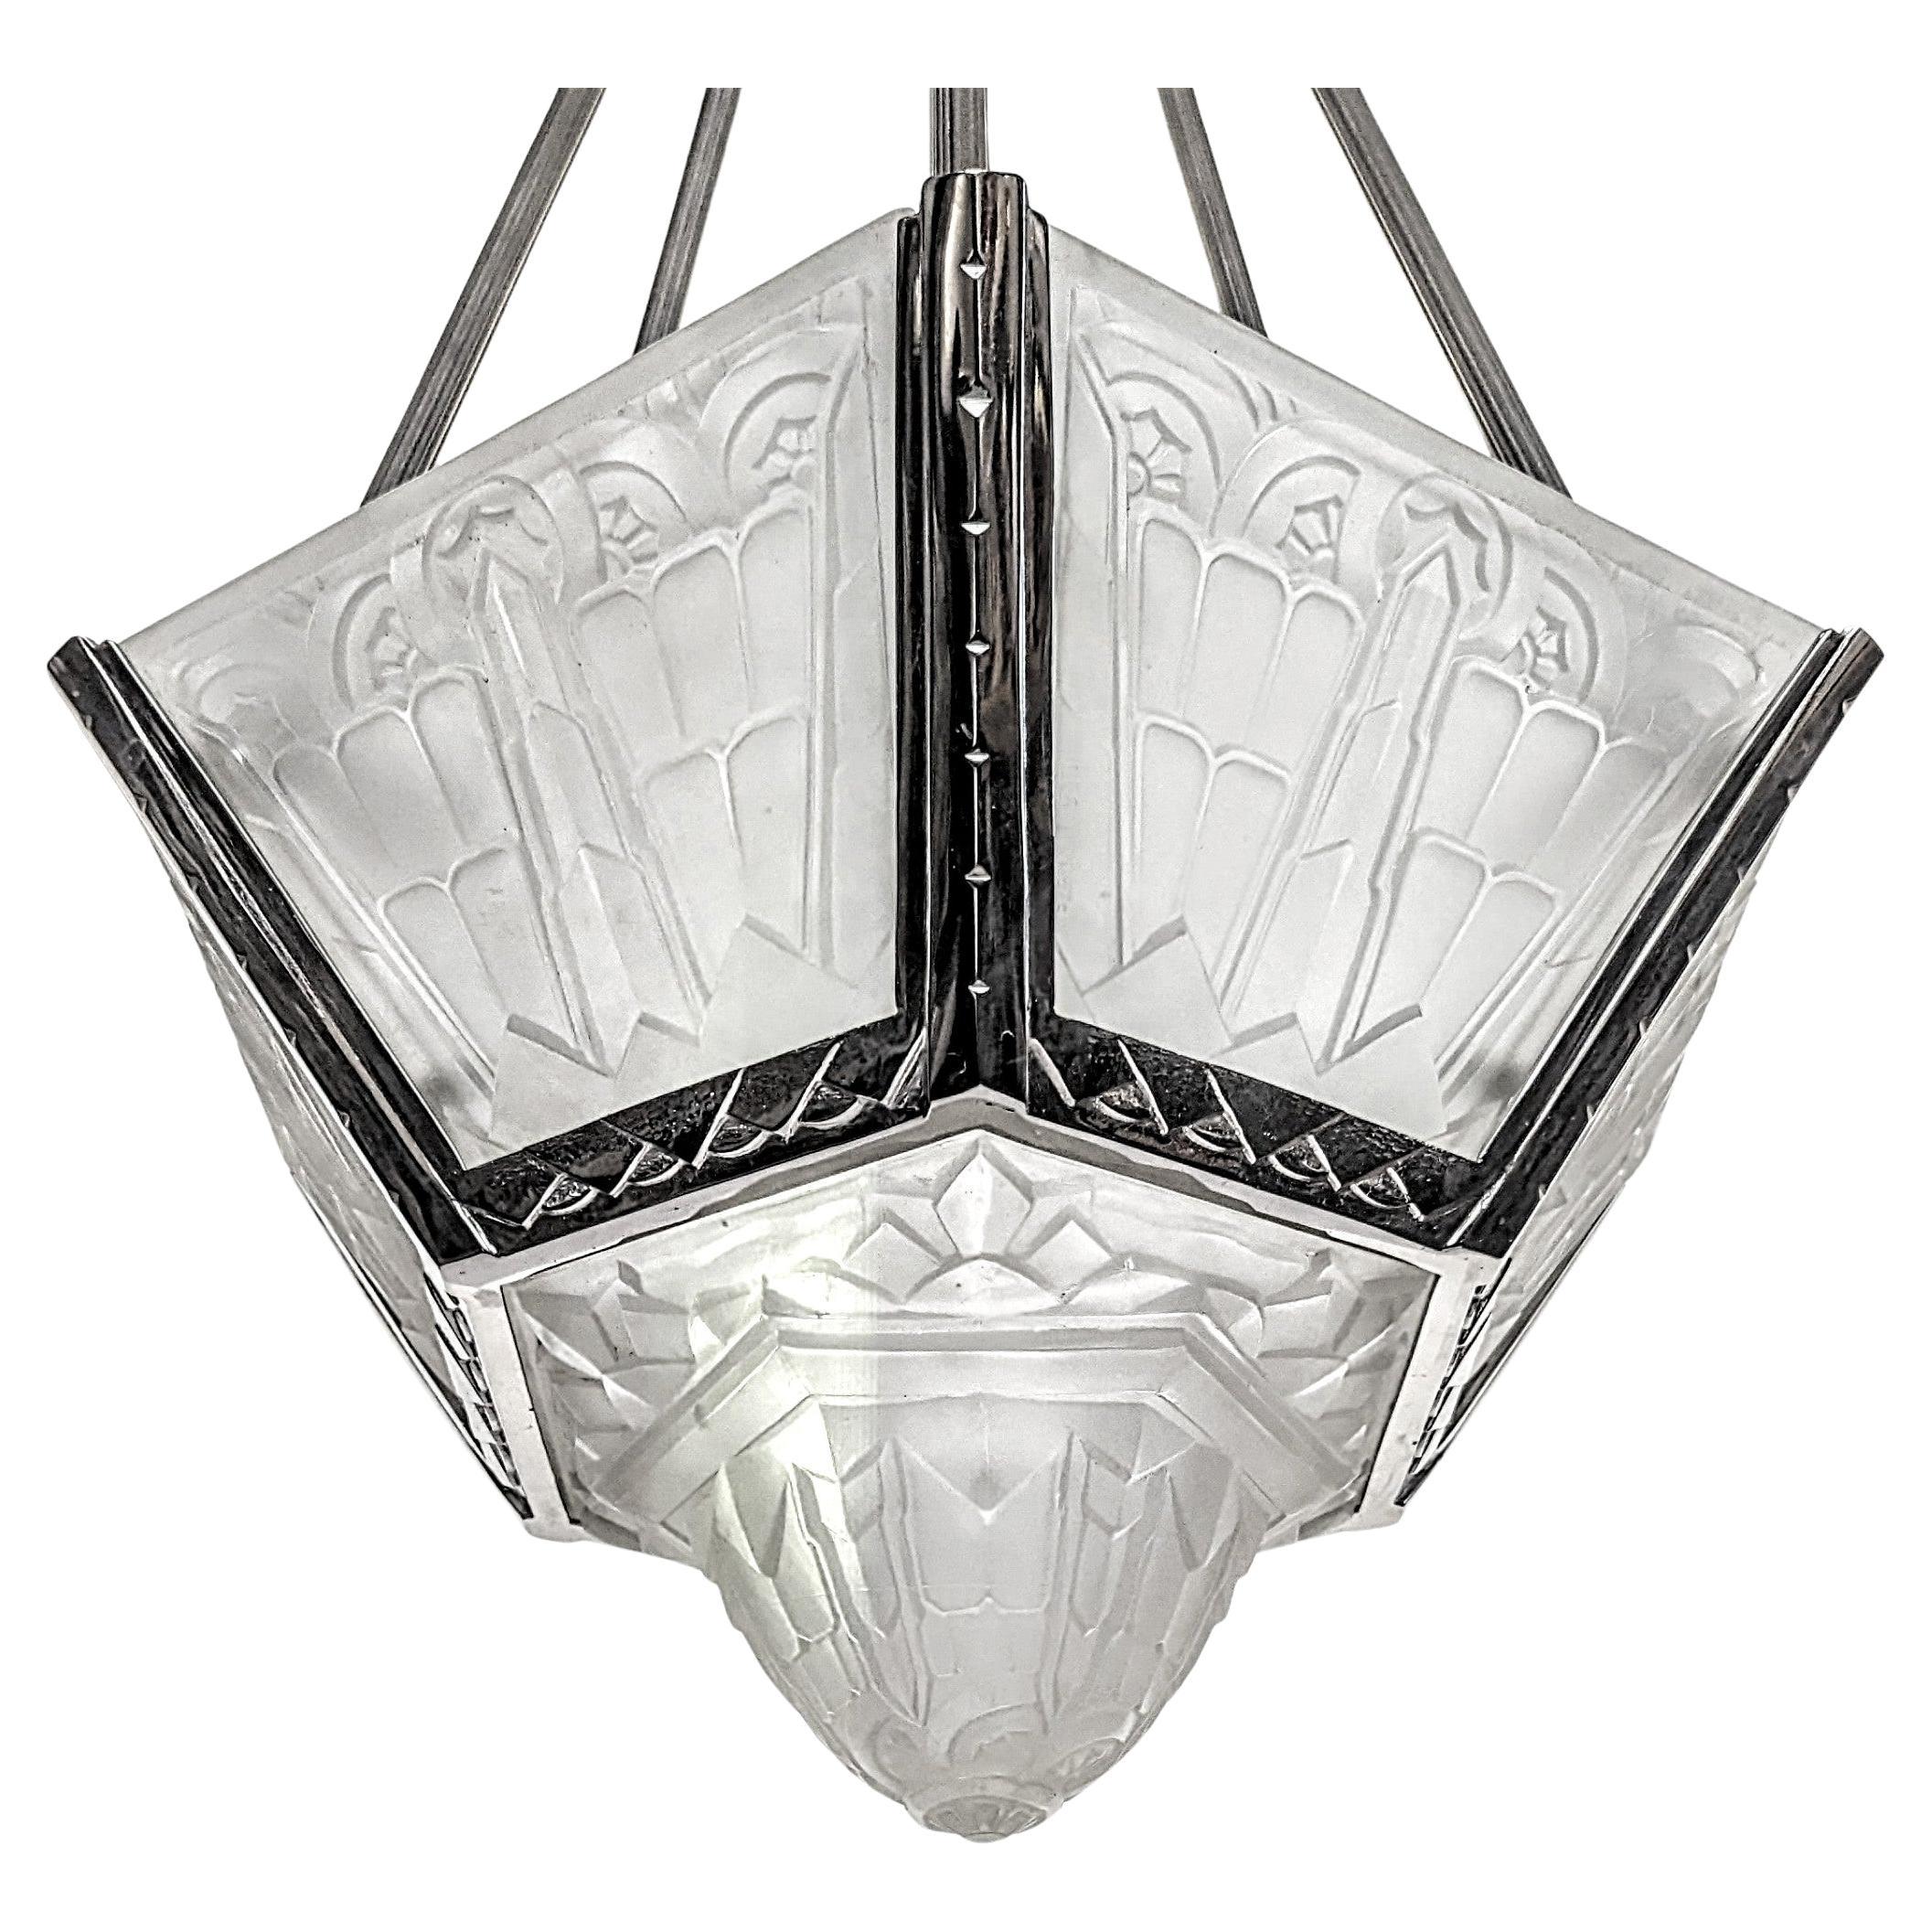 20th Century French Art Deco Pendant Chandelier Signed by Hanots For Sale